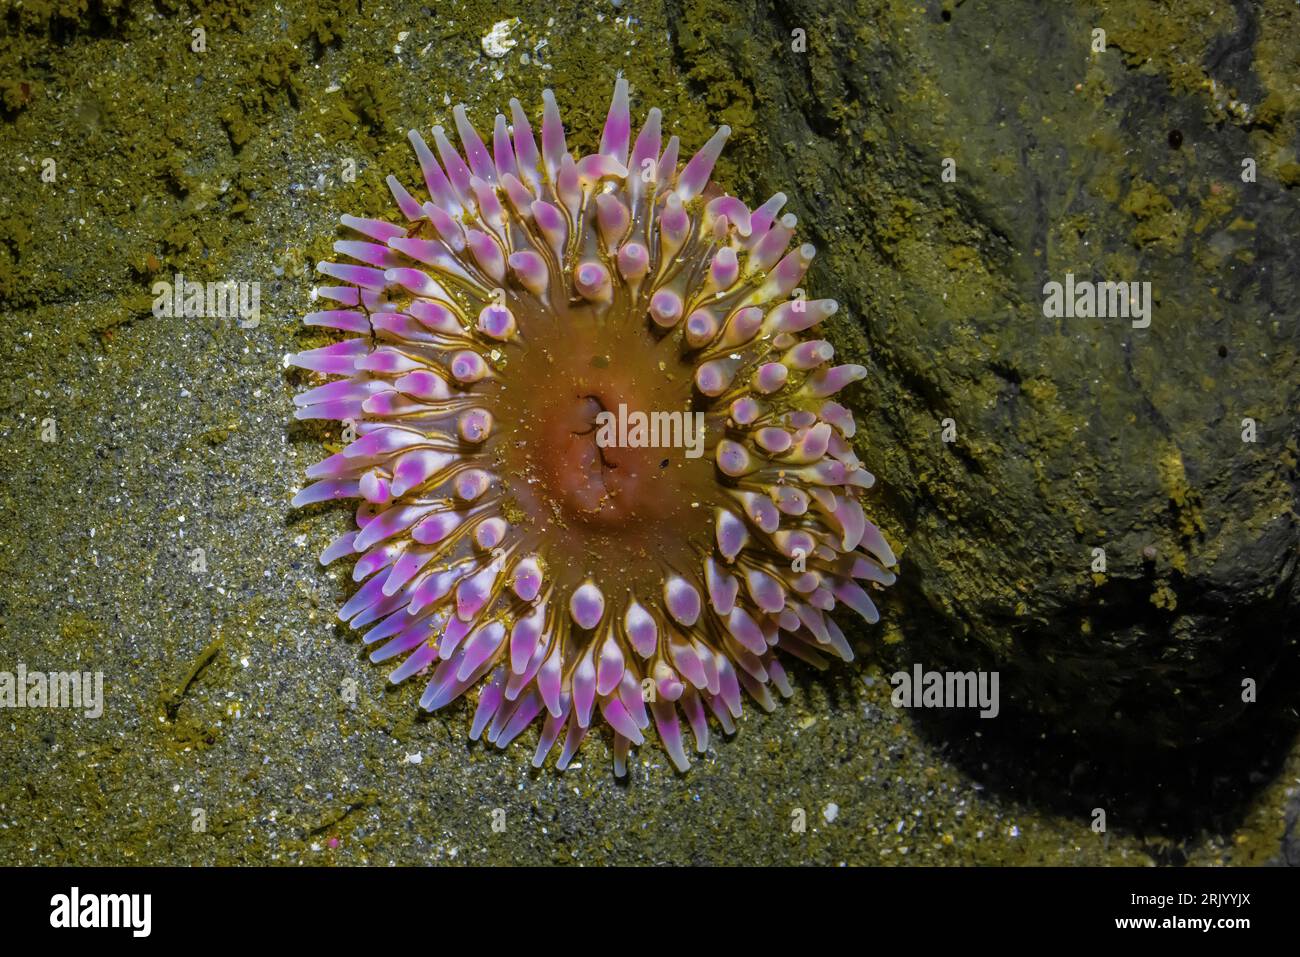 Pacific Stubby Rose Anemone, Urticina clandestina, Point of Arches, Olympic National Park, Washington State, USA Stockfoto